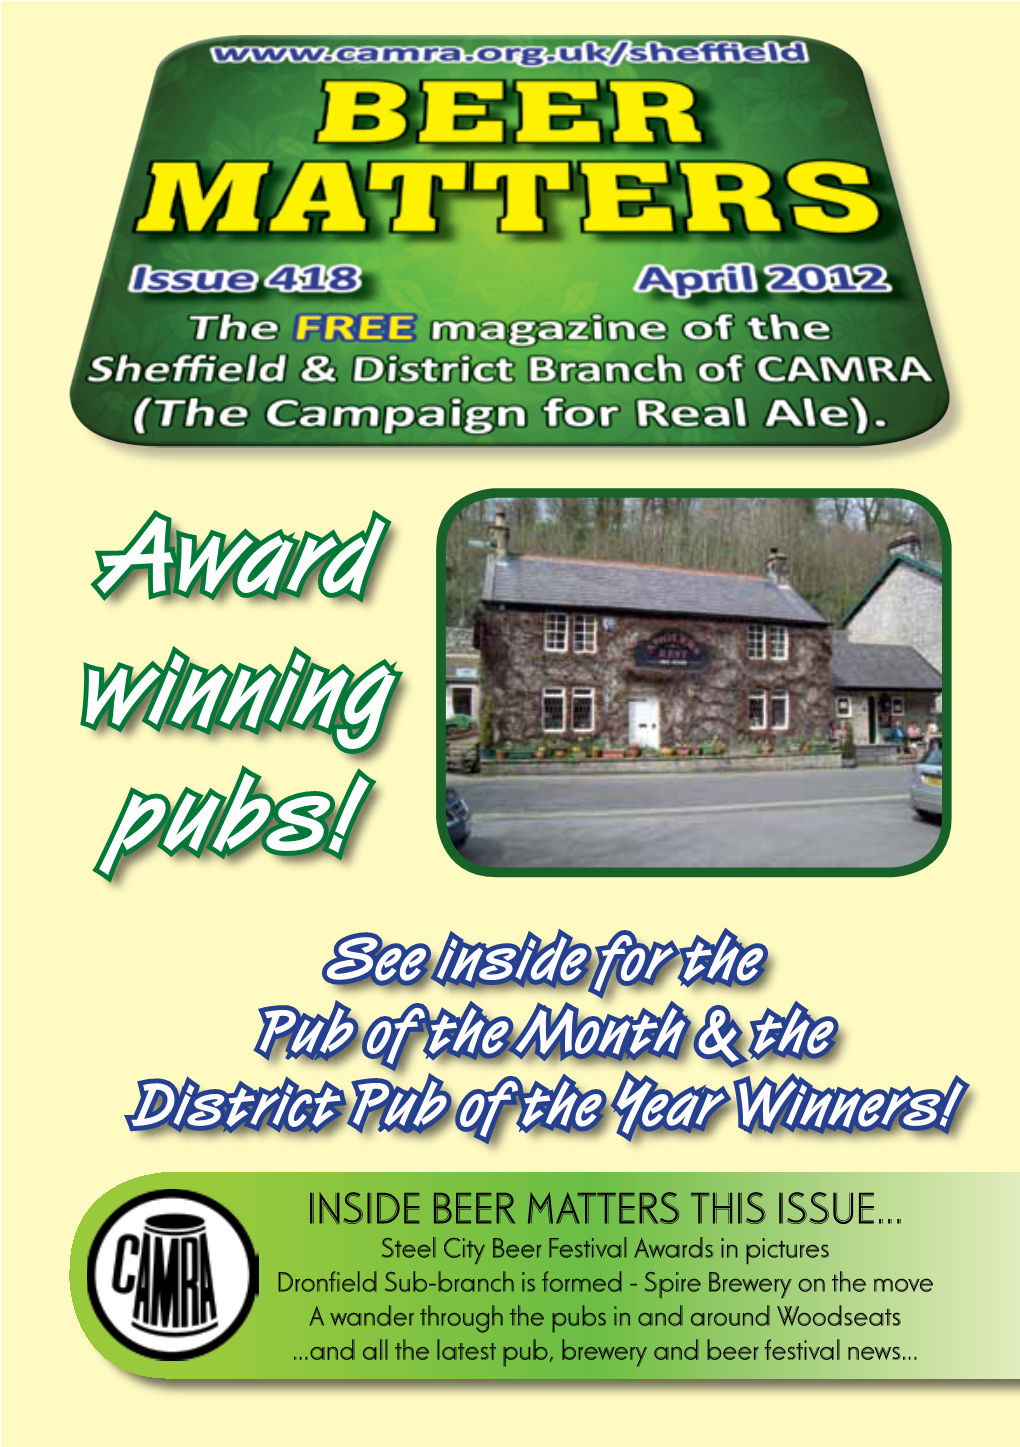 Award Winning Pubs! See Inside for the Pub of the Month & the District Pub of the Year Winners!